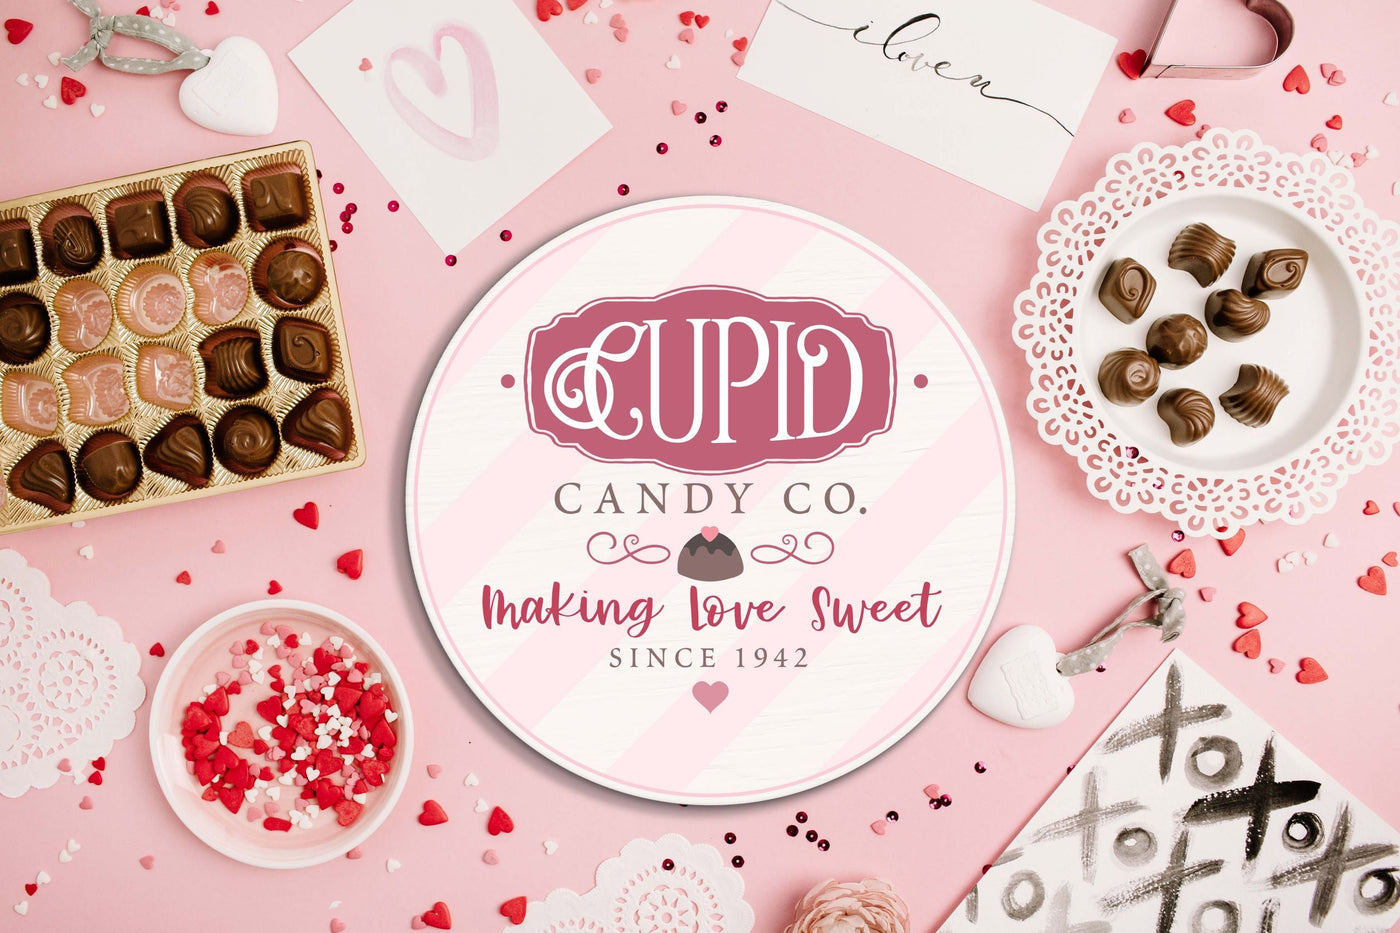 CUPID CANDY CO.